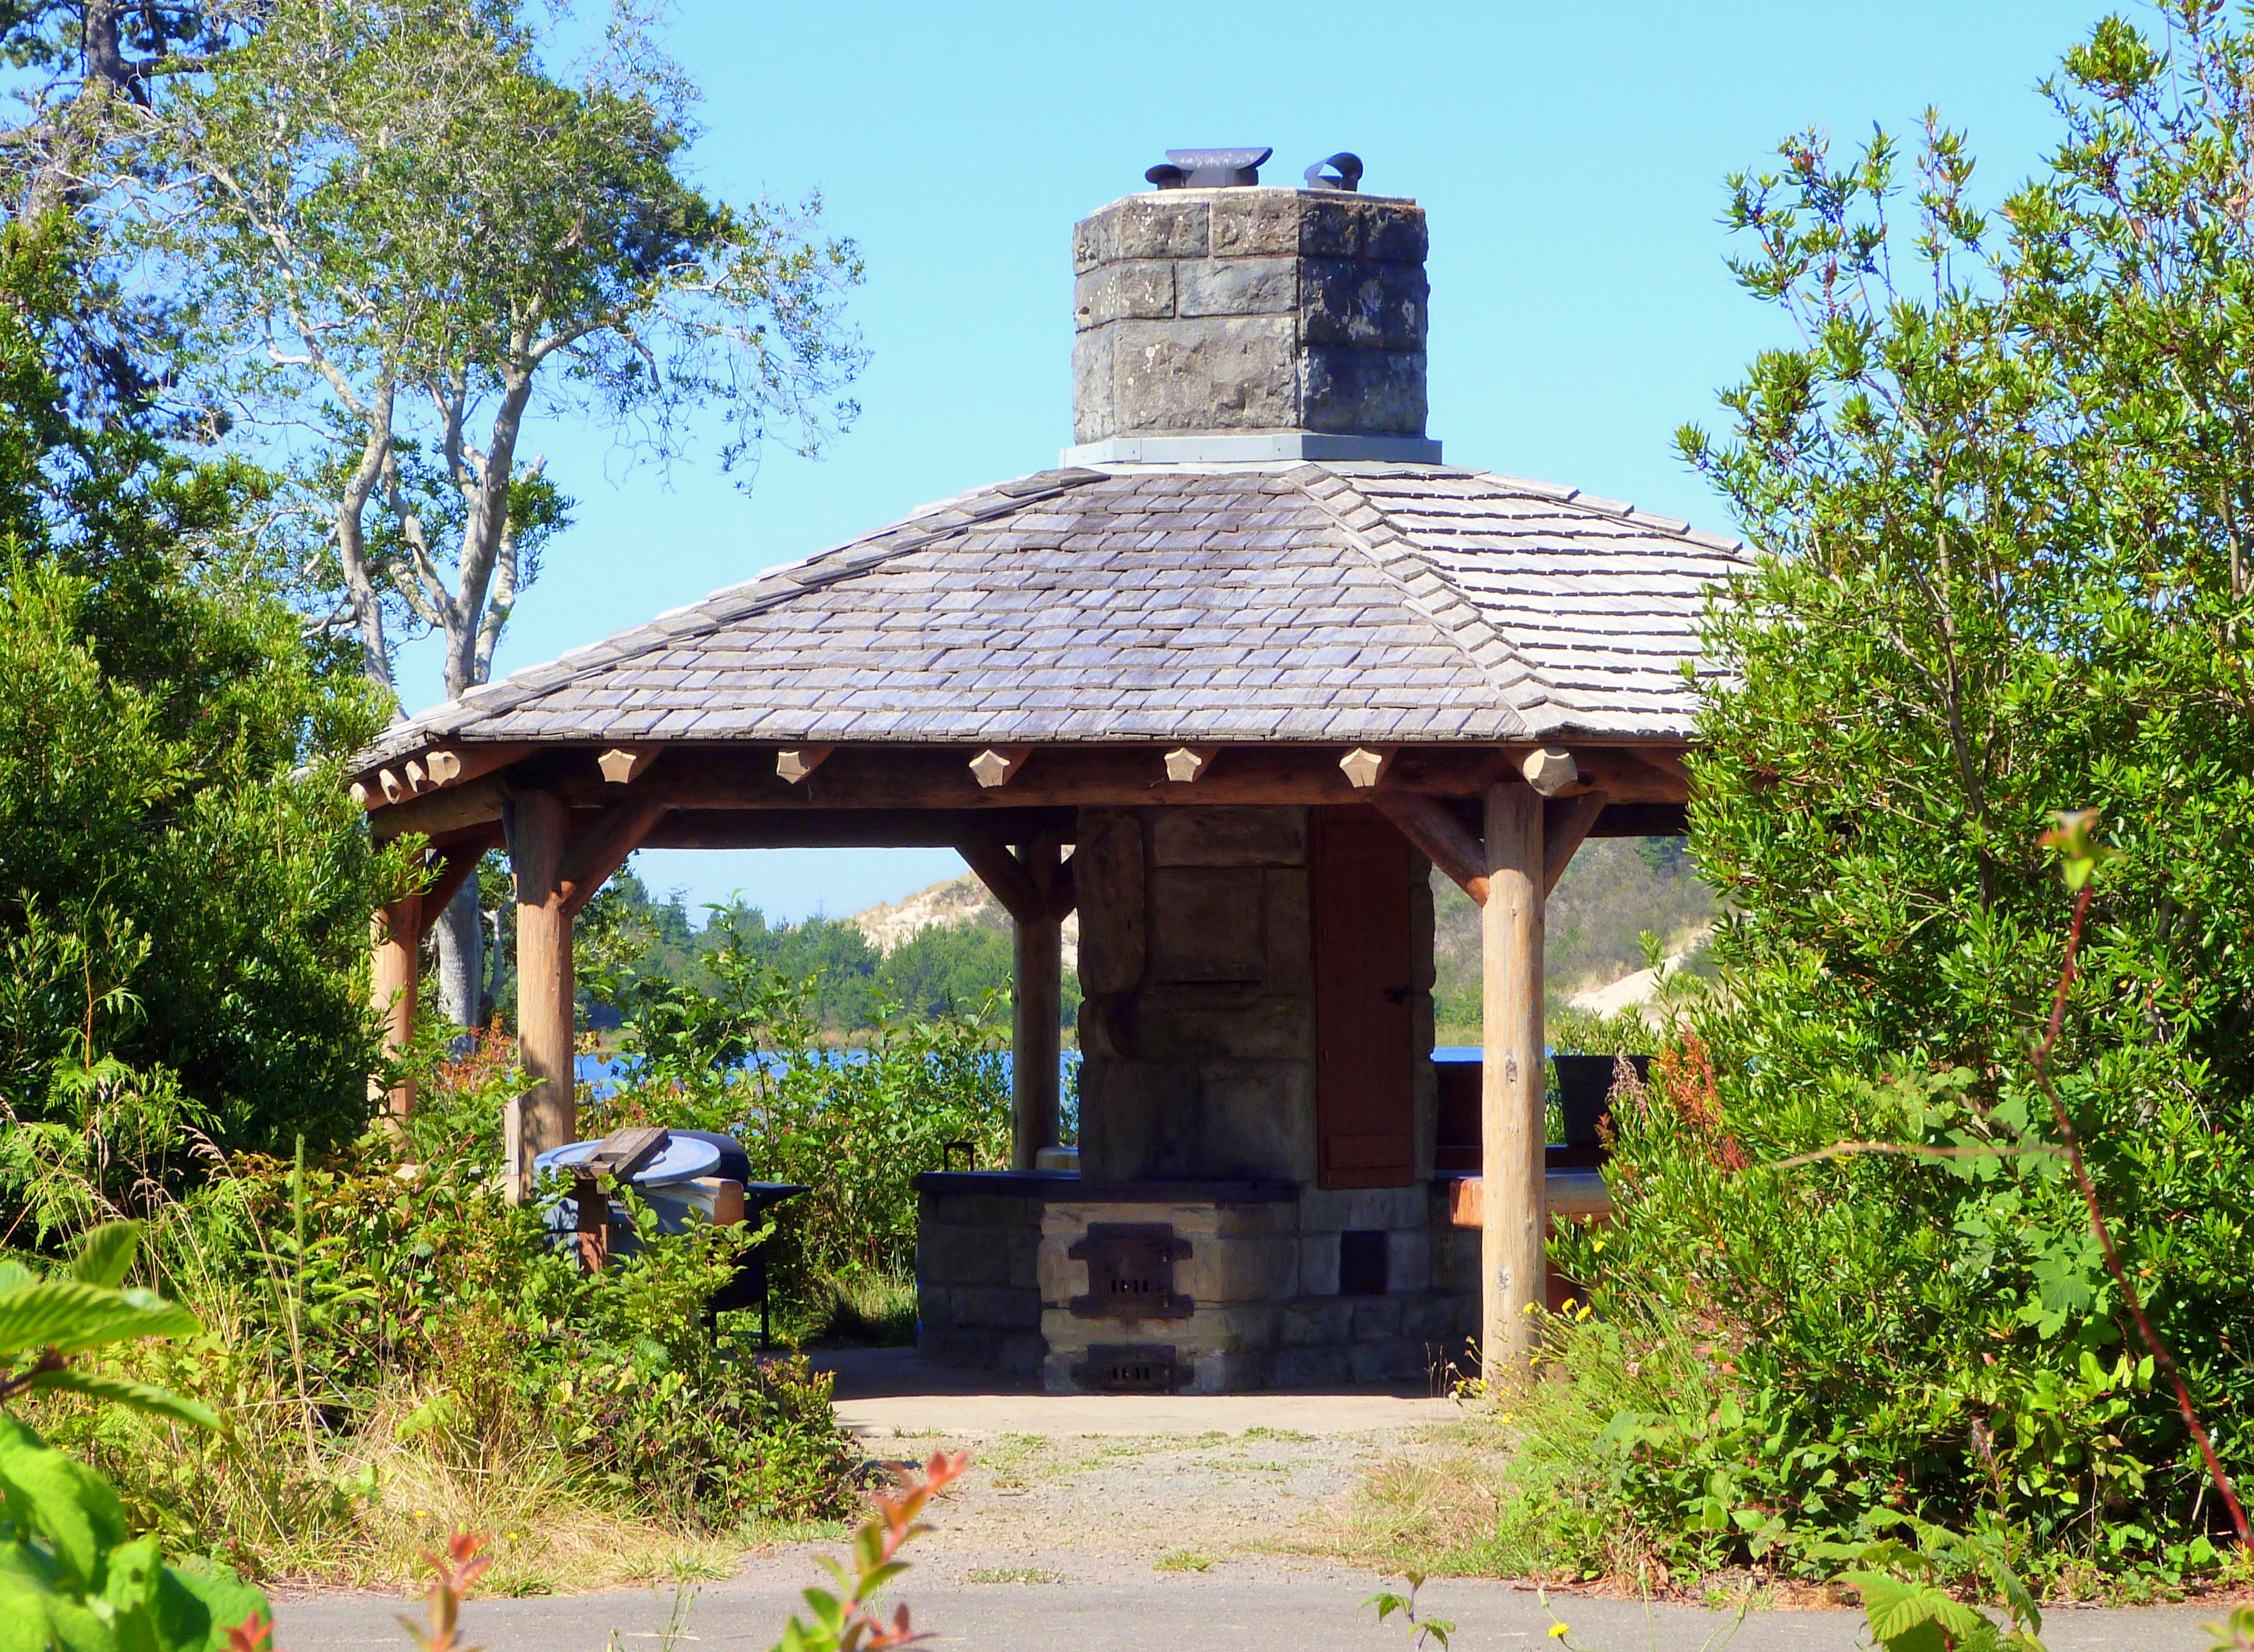 Outdoor kitchen gazebo with a chimney